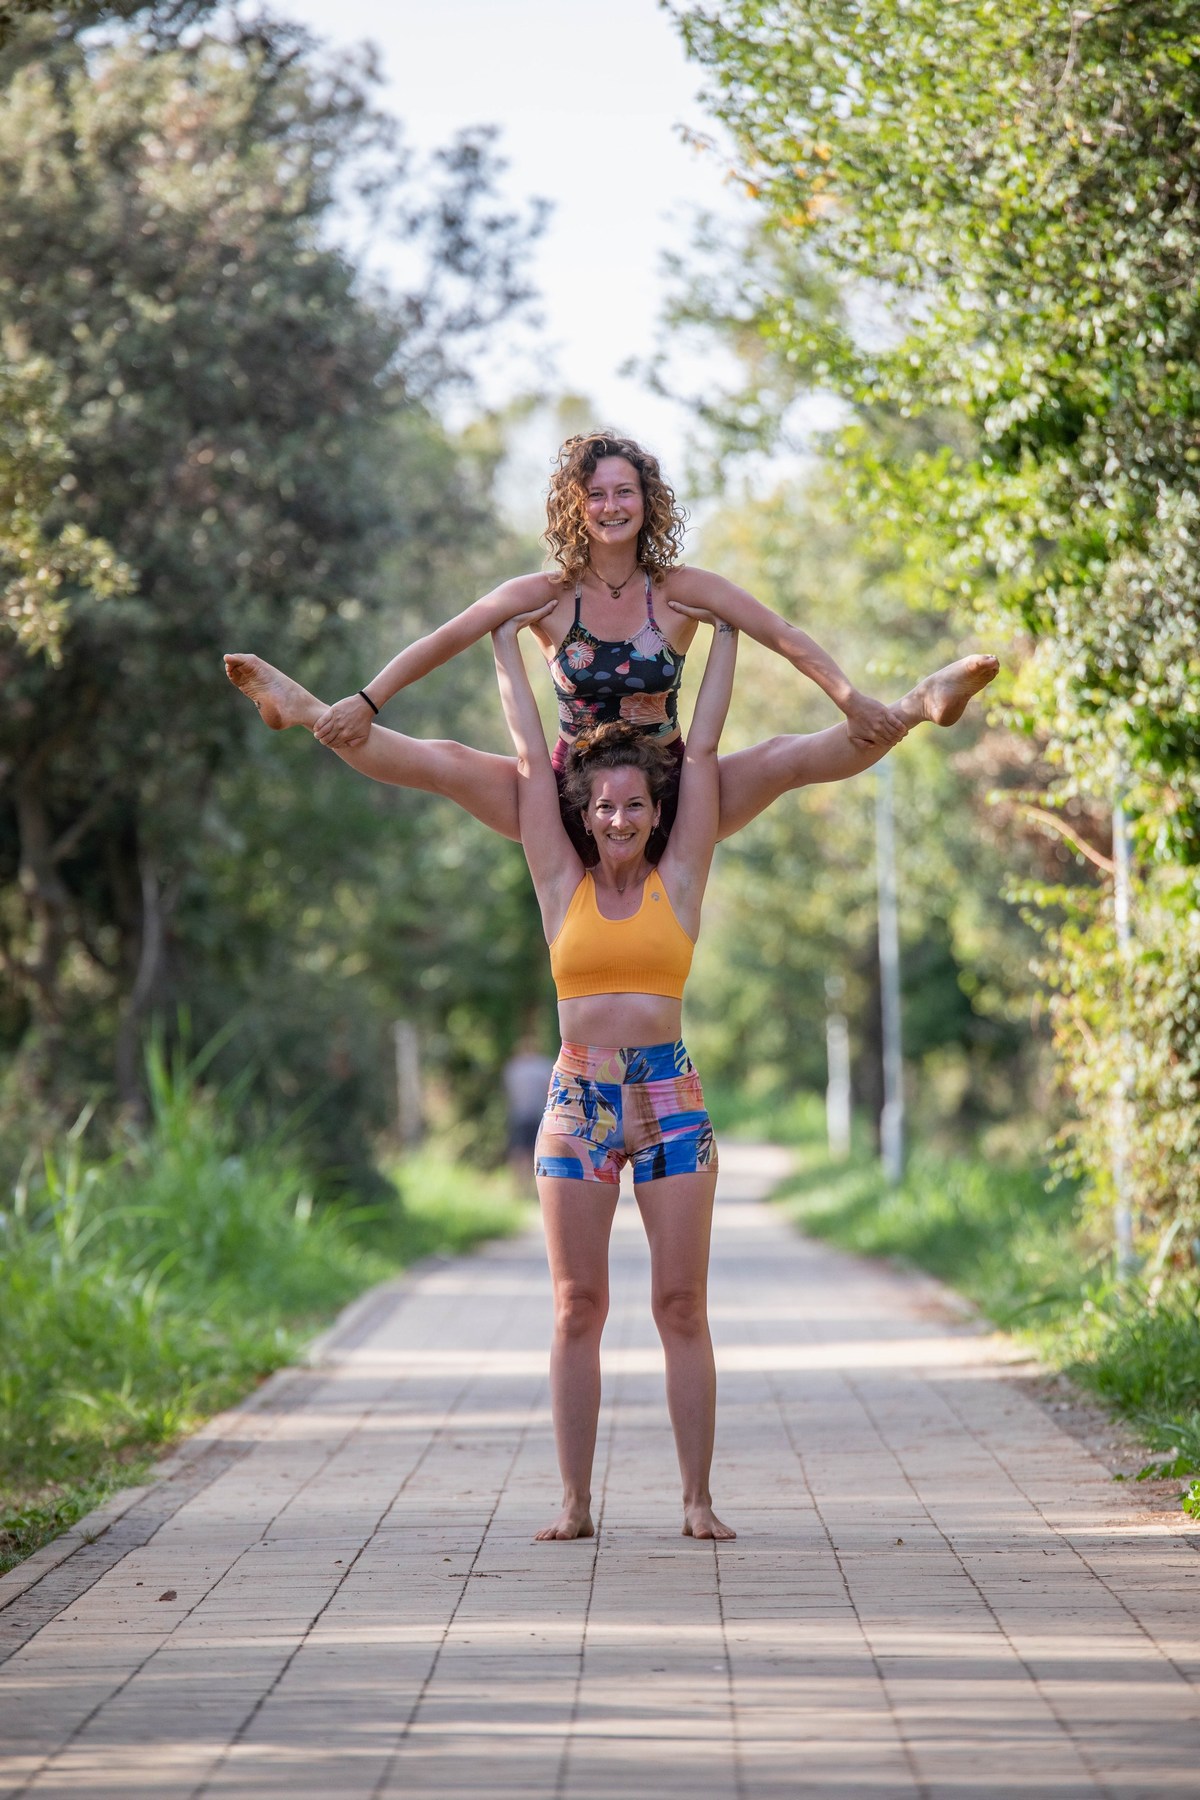 One girl basing another girl in a partner acrobatic pose high up in the air on a path in the woods.